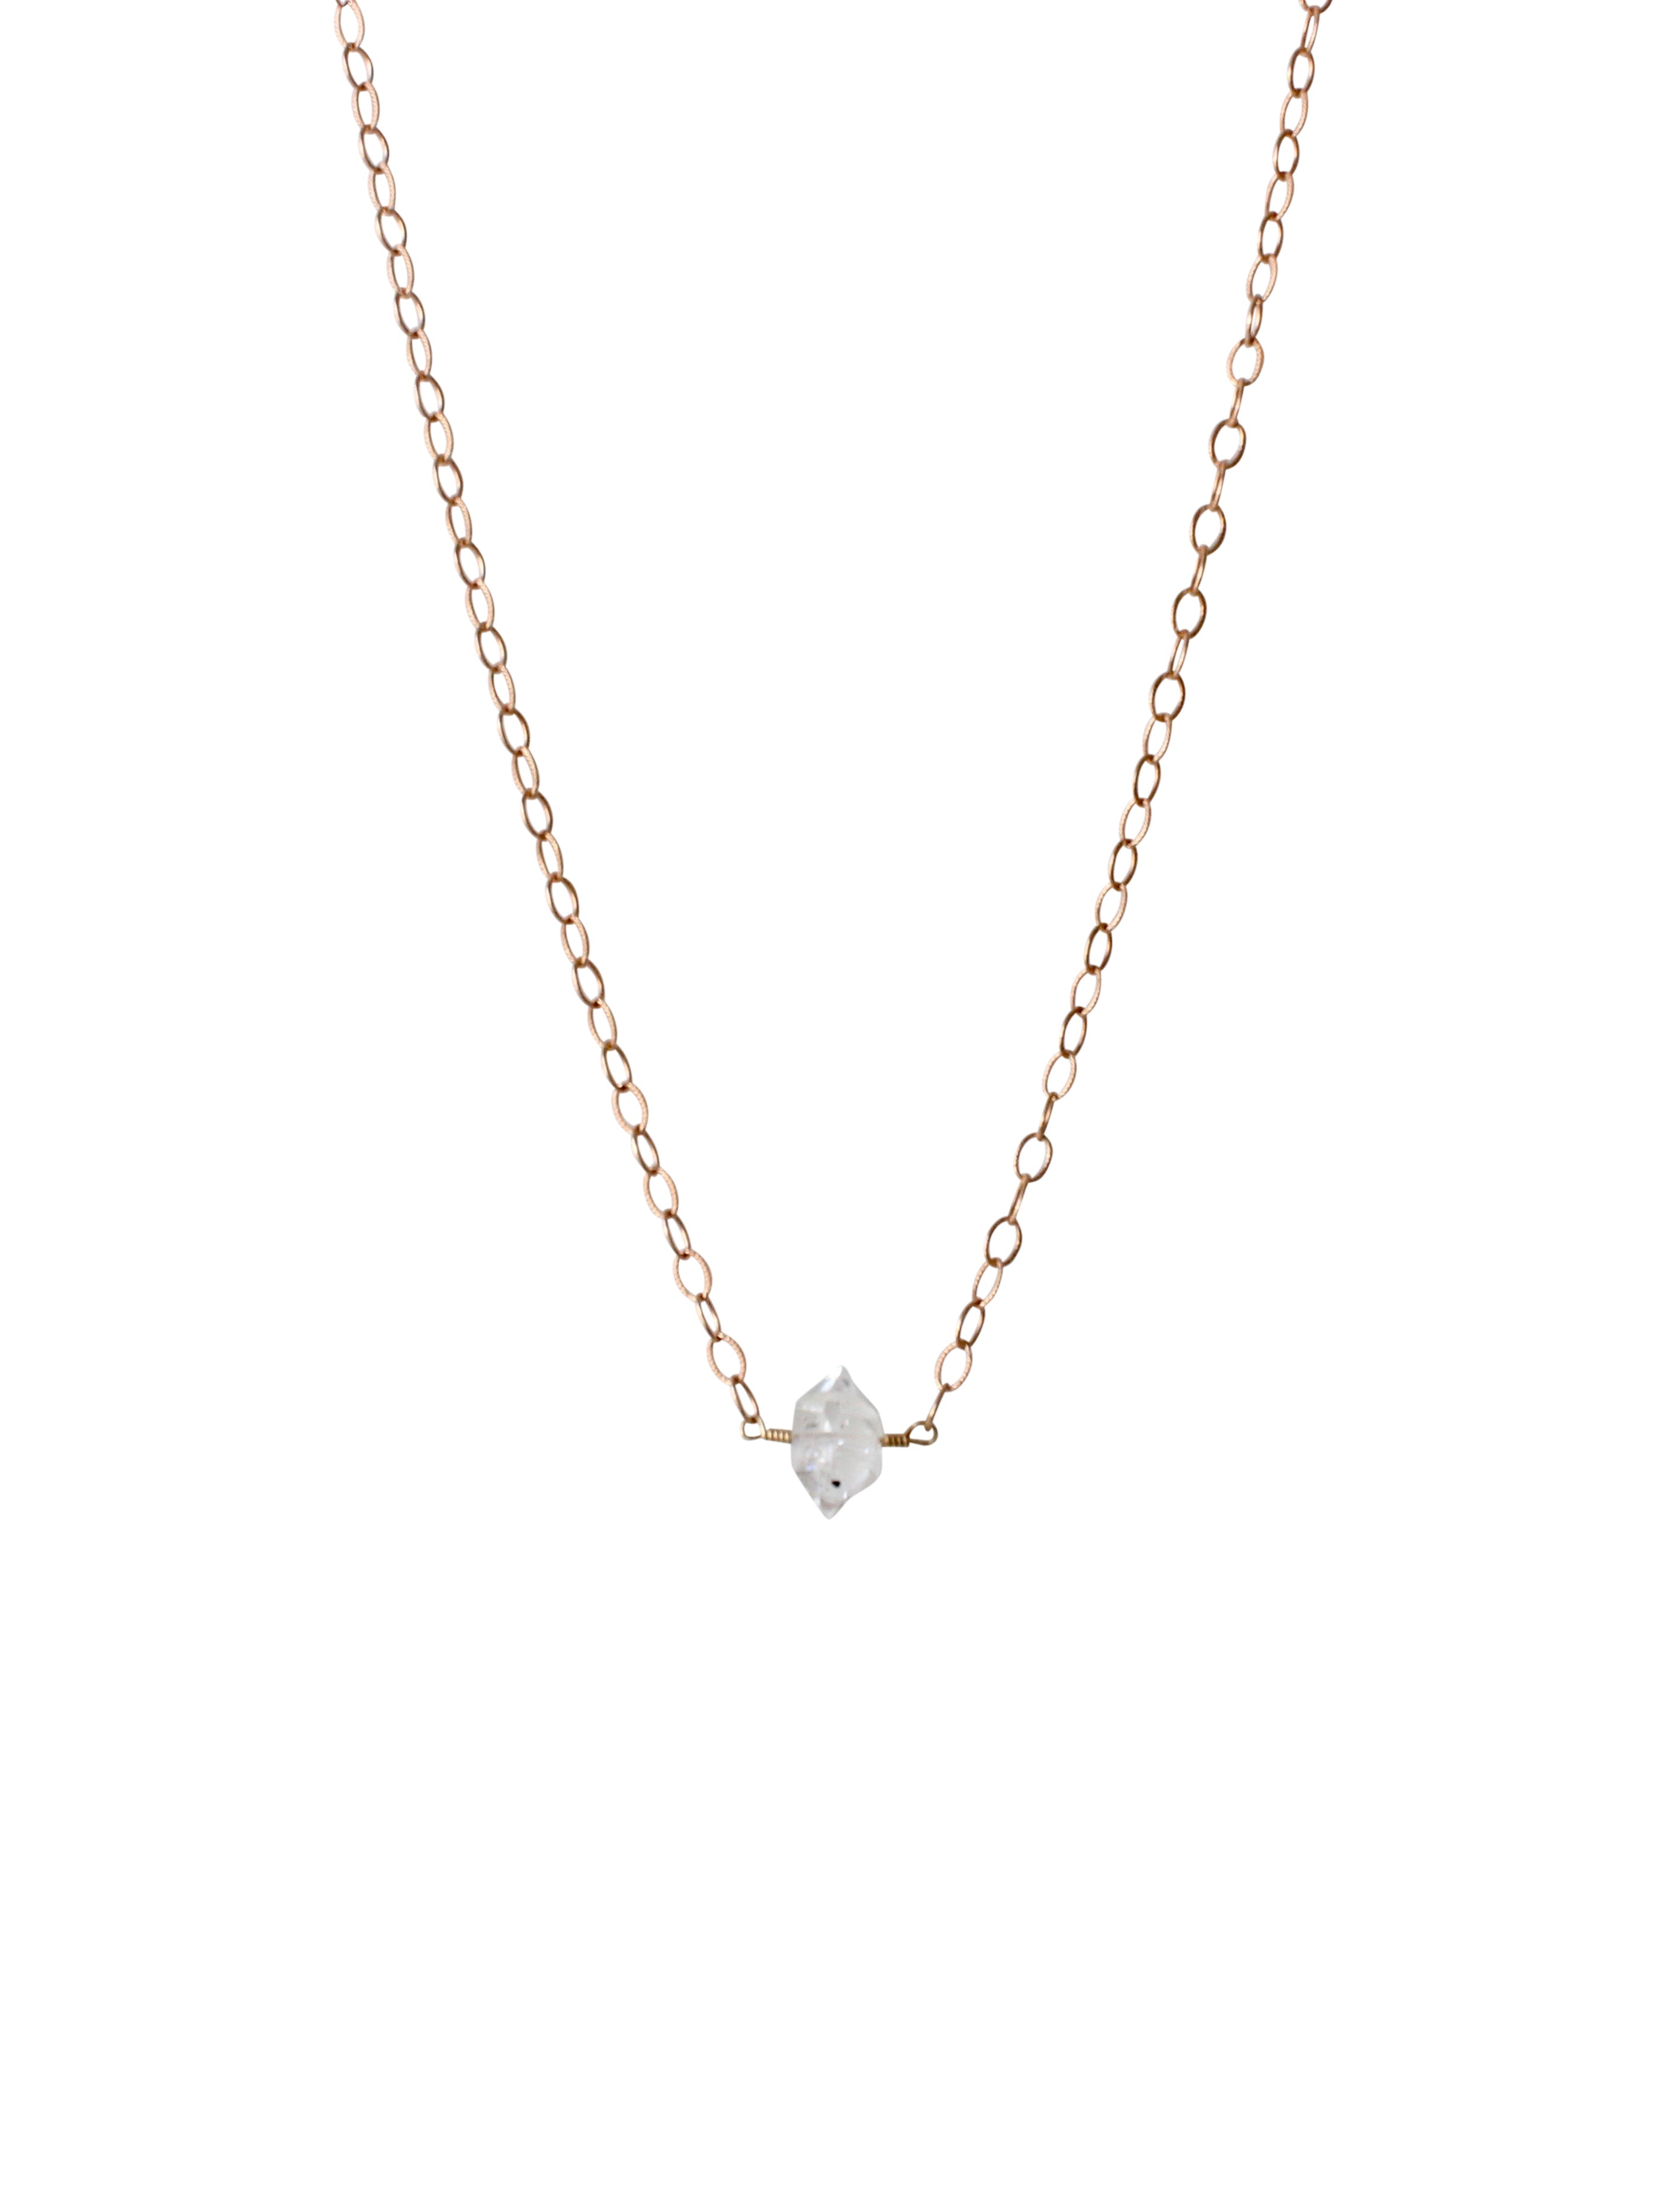 Herkimer Diamond Drop Necklace in Yellow Gold